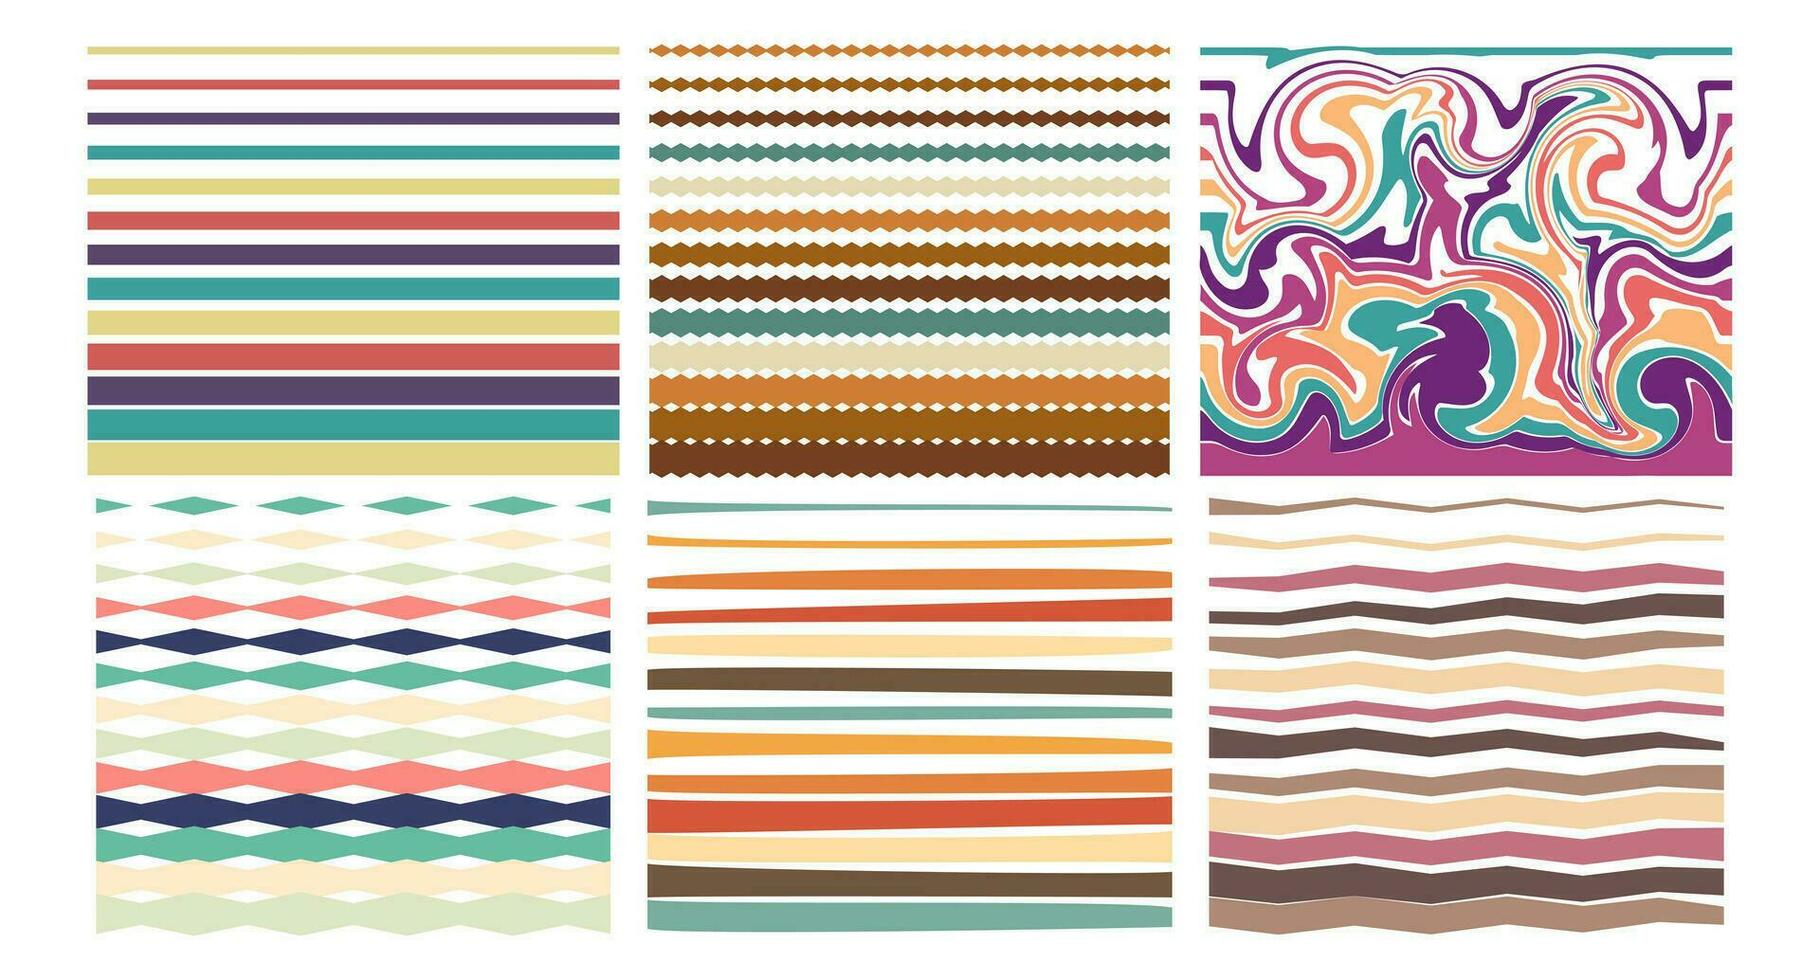 Horizontal groovy striped background in 70s 80s style. Psychedelic abstract background. Set of abstract retro patterns in hippie style. Vector illustration.